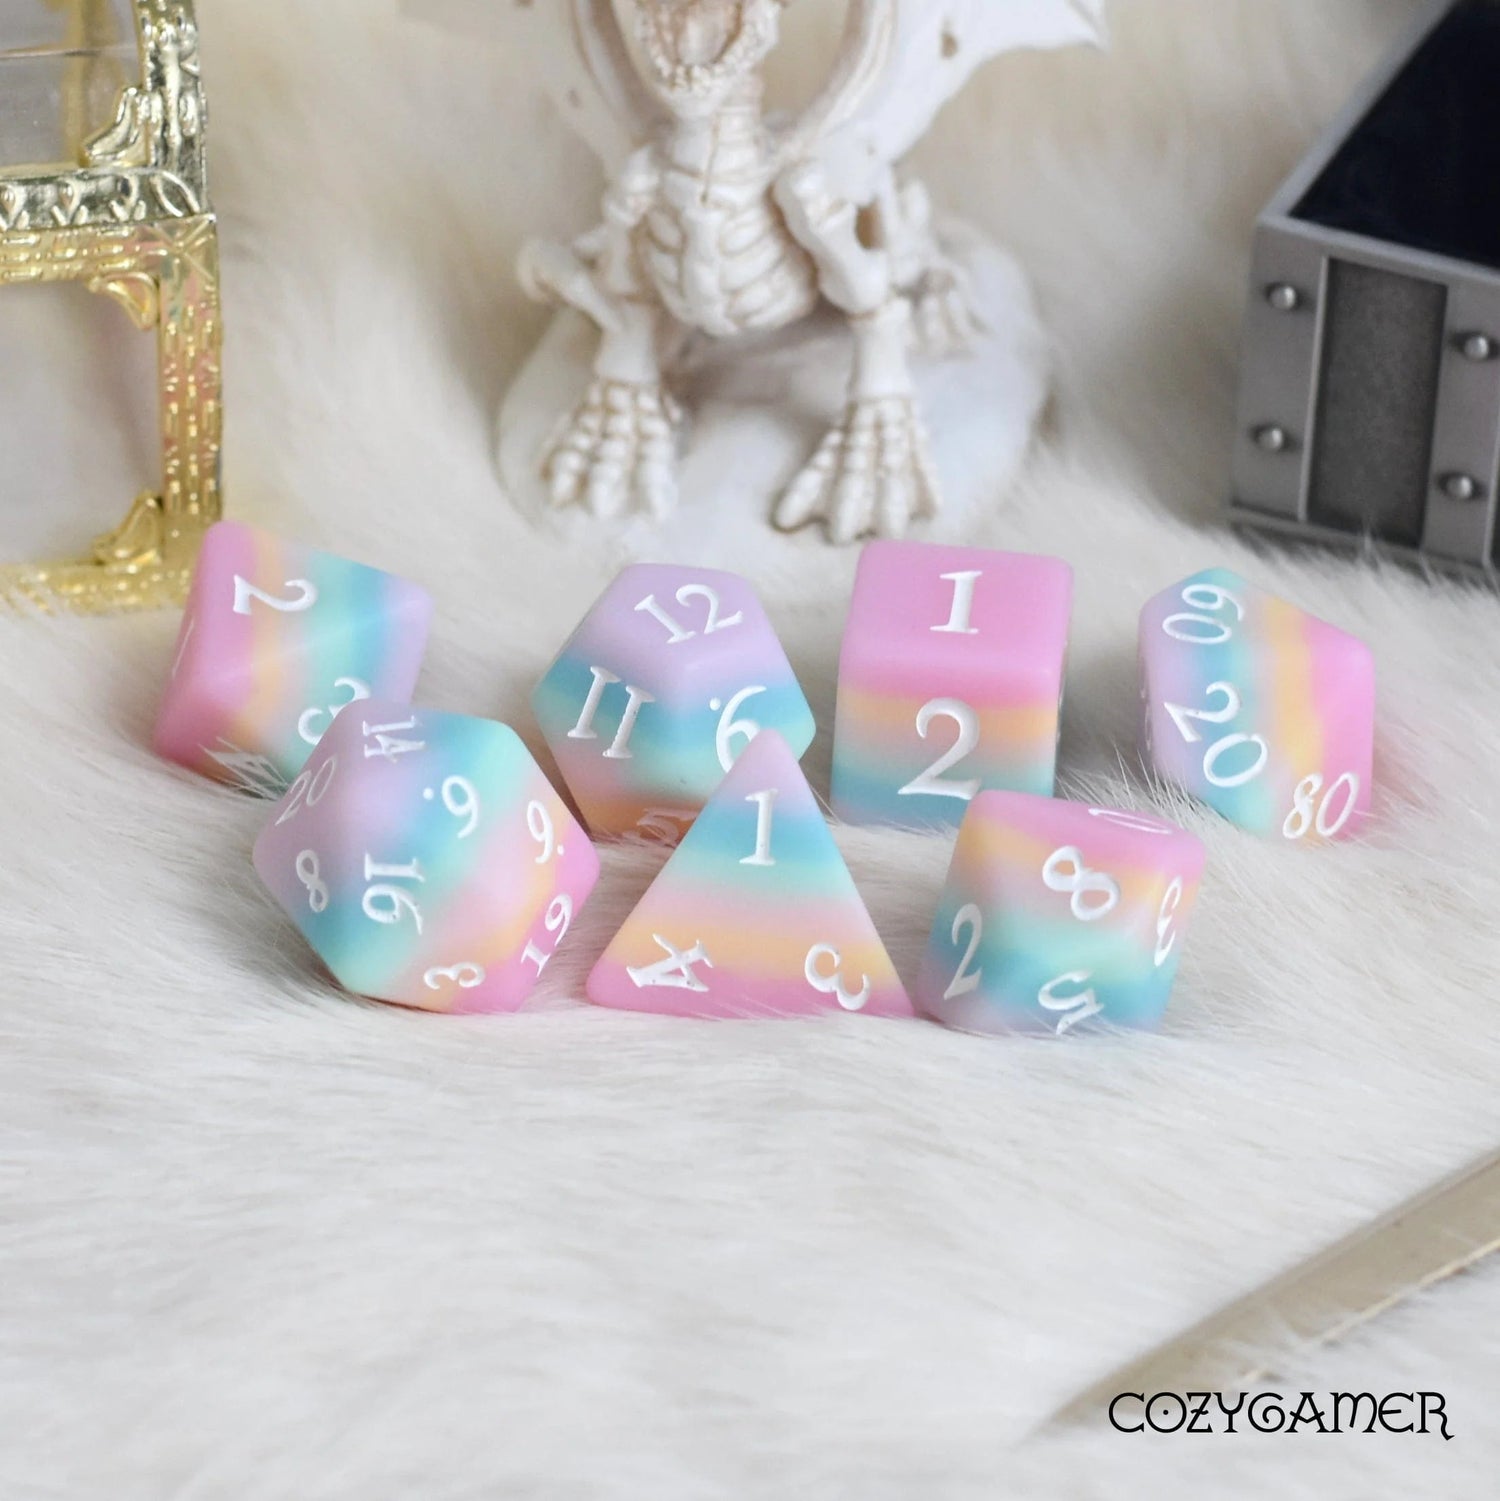 Dazed and Dreamy - 7 Dice Set - The Fourth Place